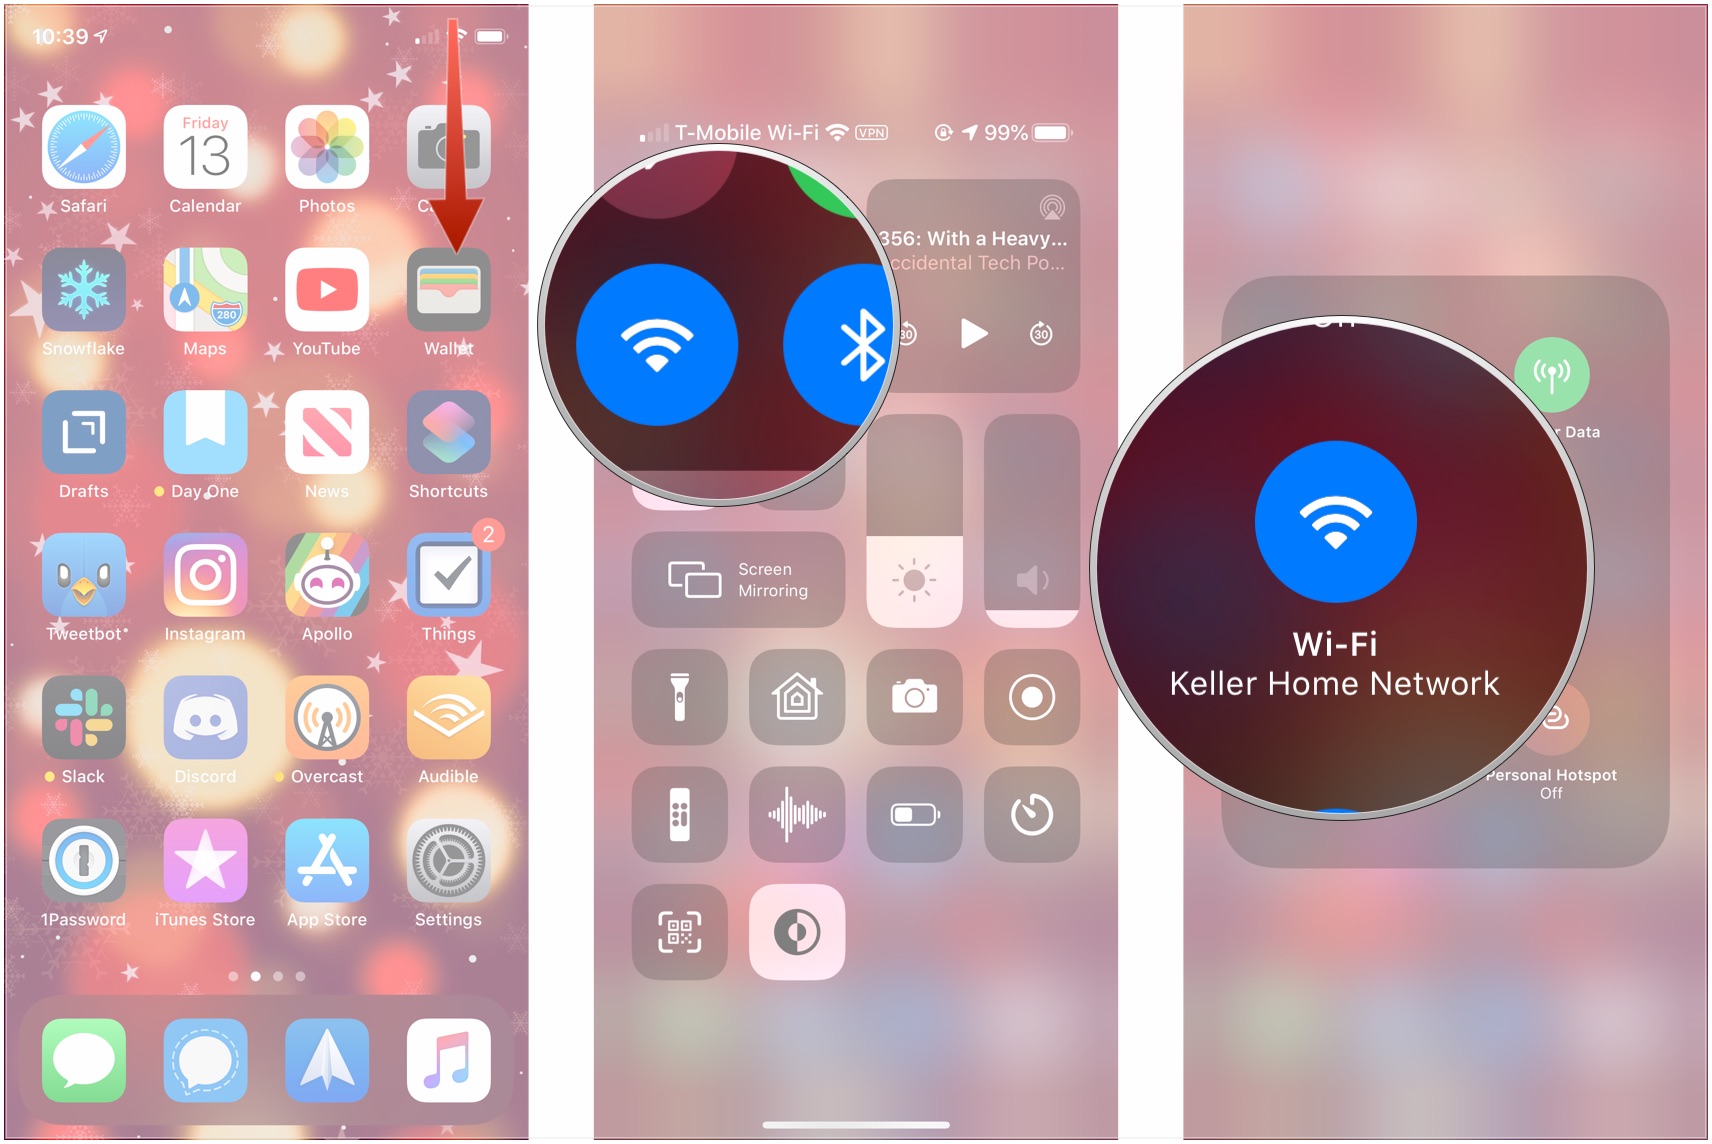 See Control Center actions with Haptic Touch, showing how to open Control Center, long-press Wi-Fi indicator, then long-press Wi-Fi indicator